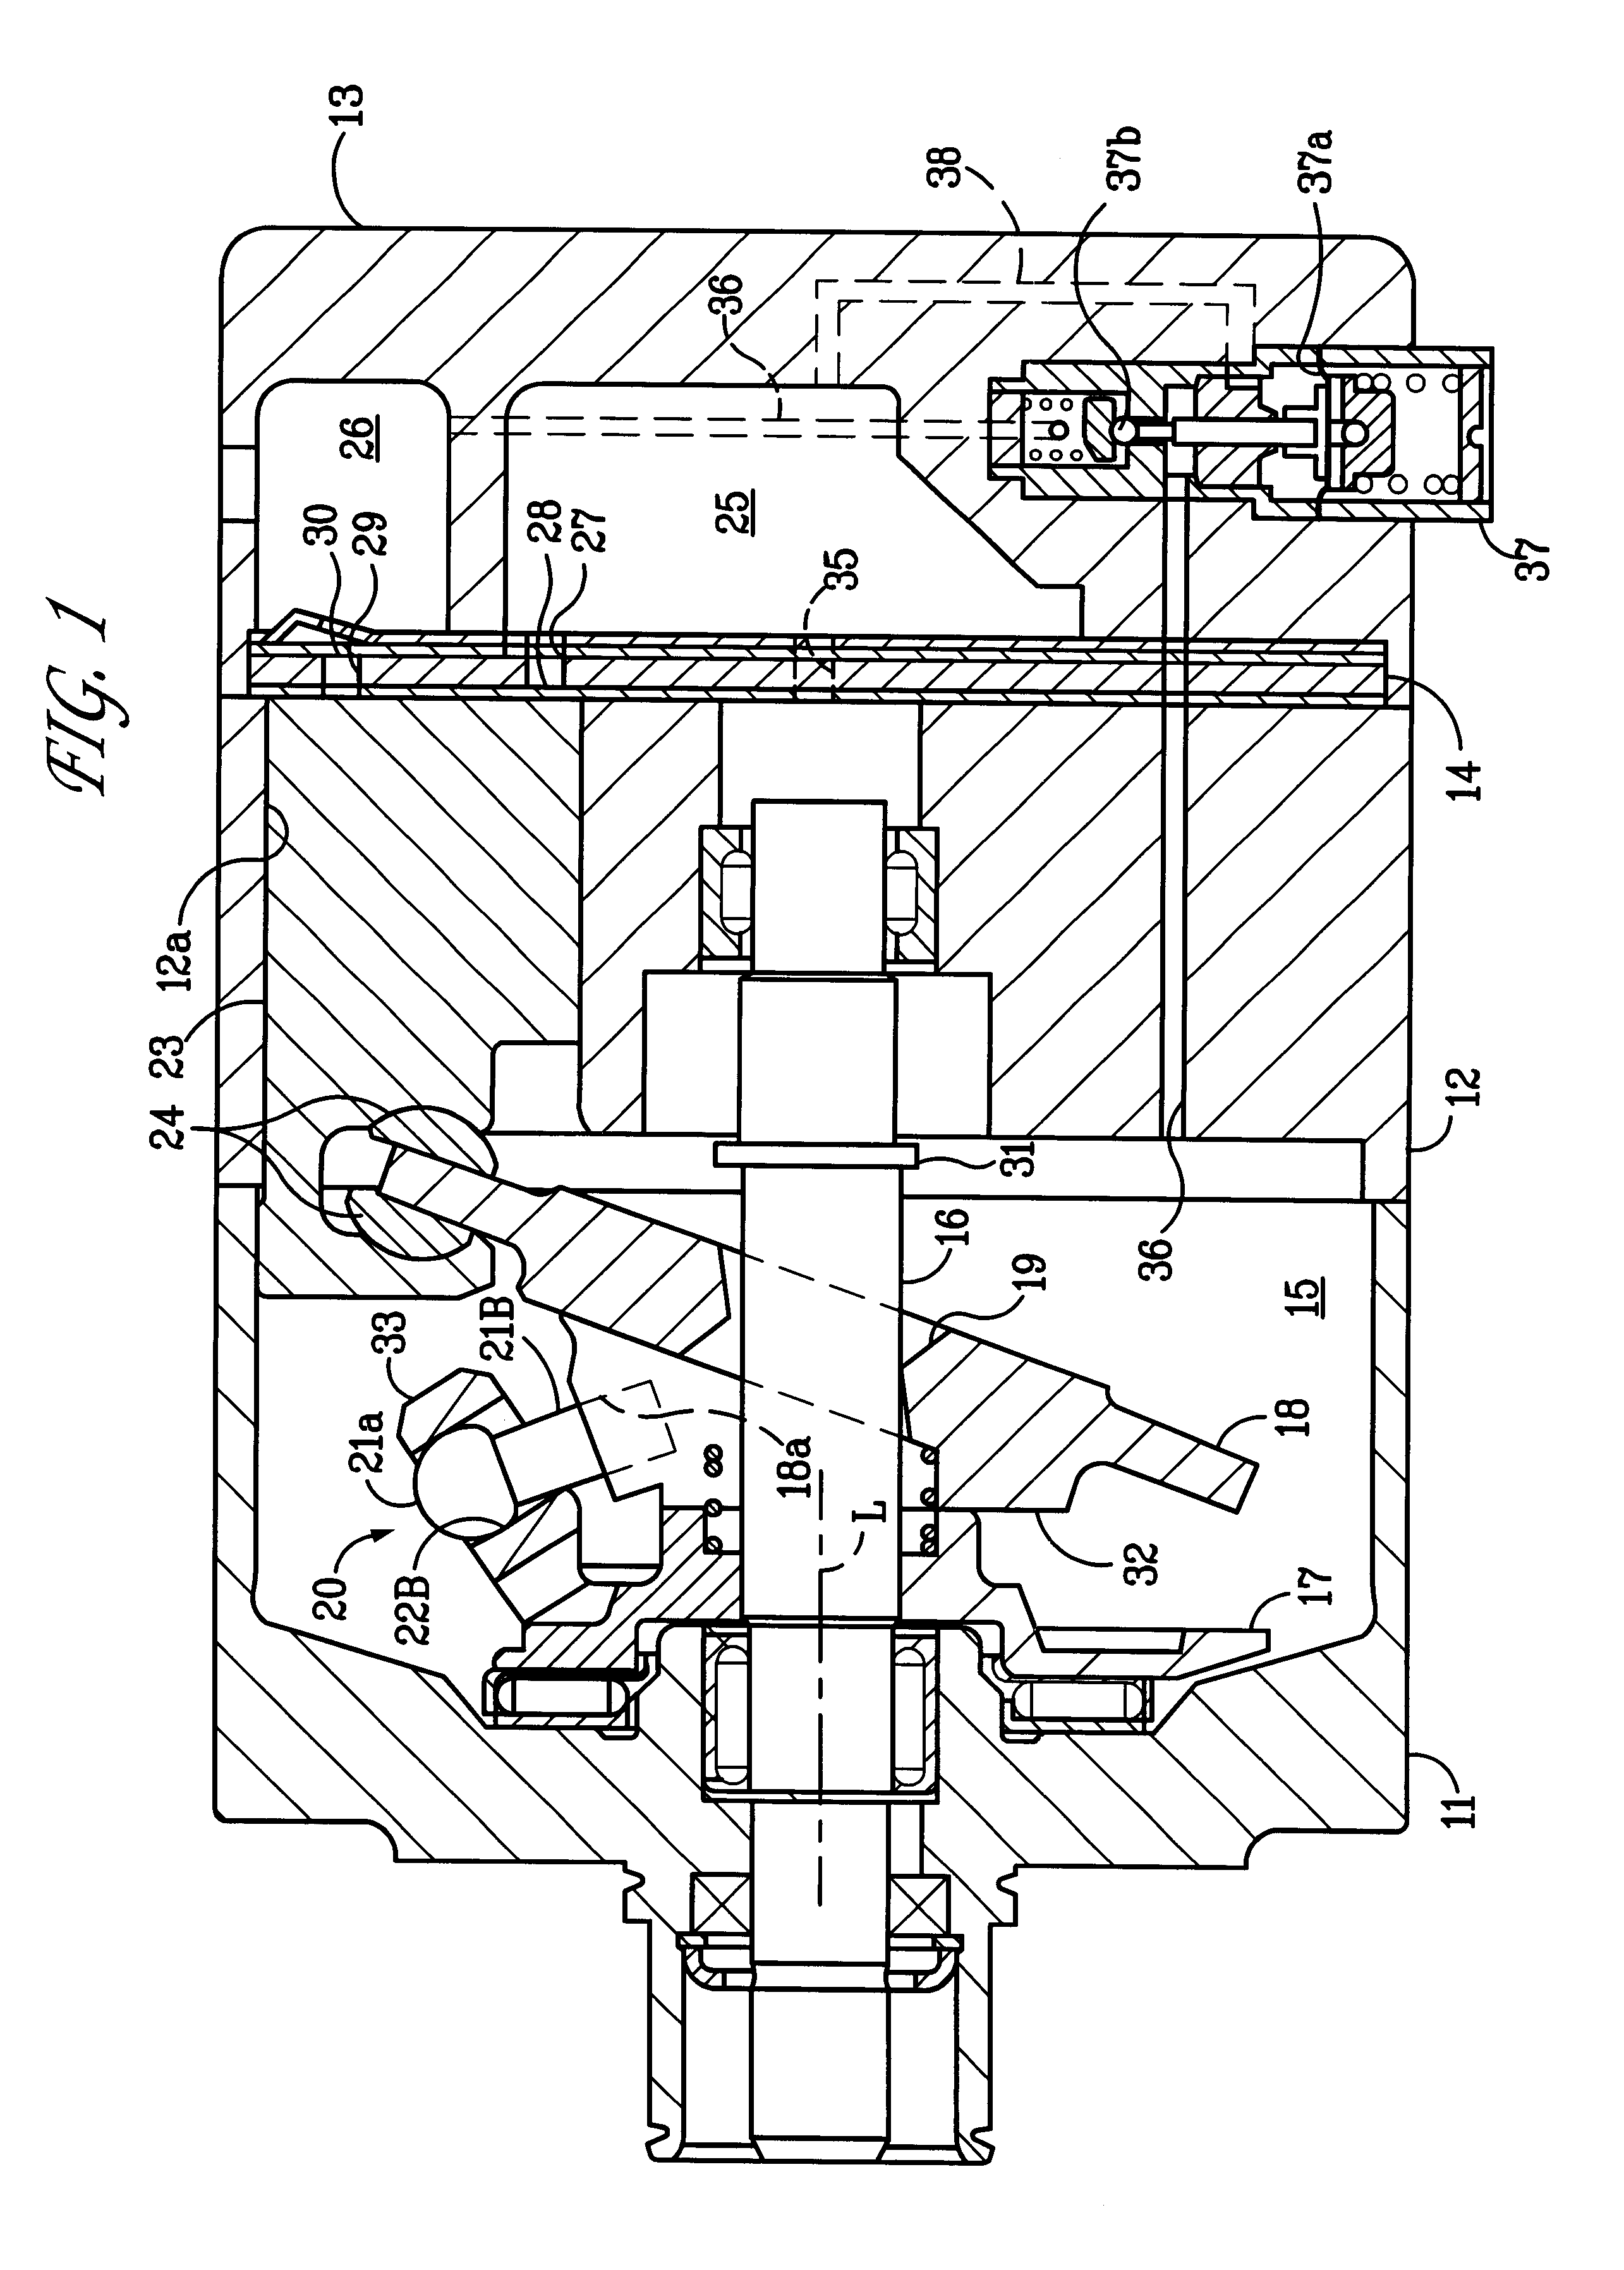 Variable capacity refrigerant compressor having an inclination limiting means to interrupt compressive forces on a hinge mechanism